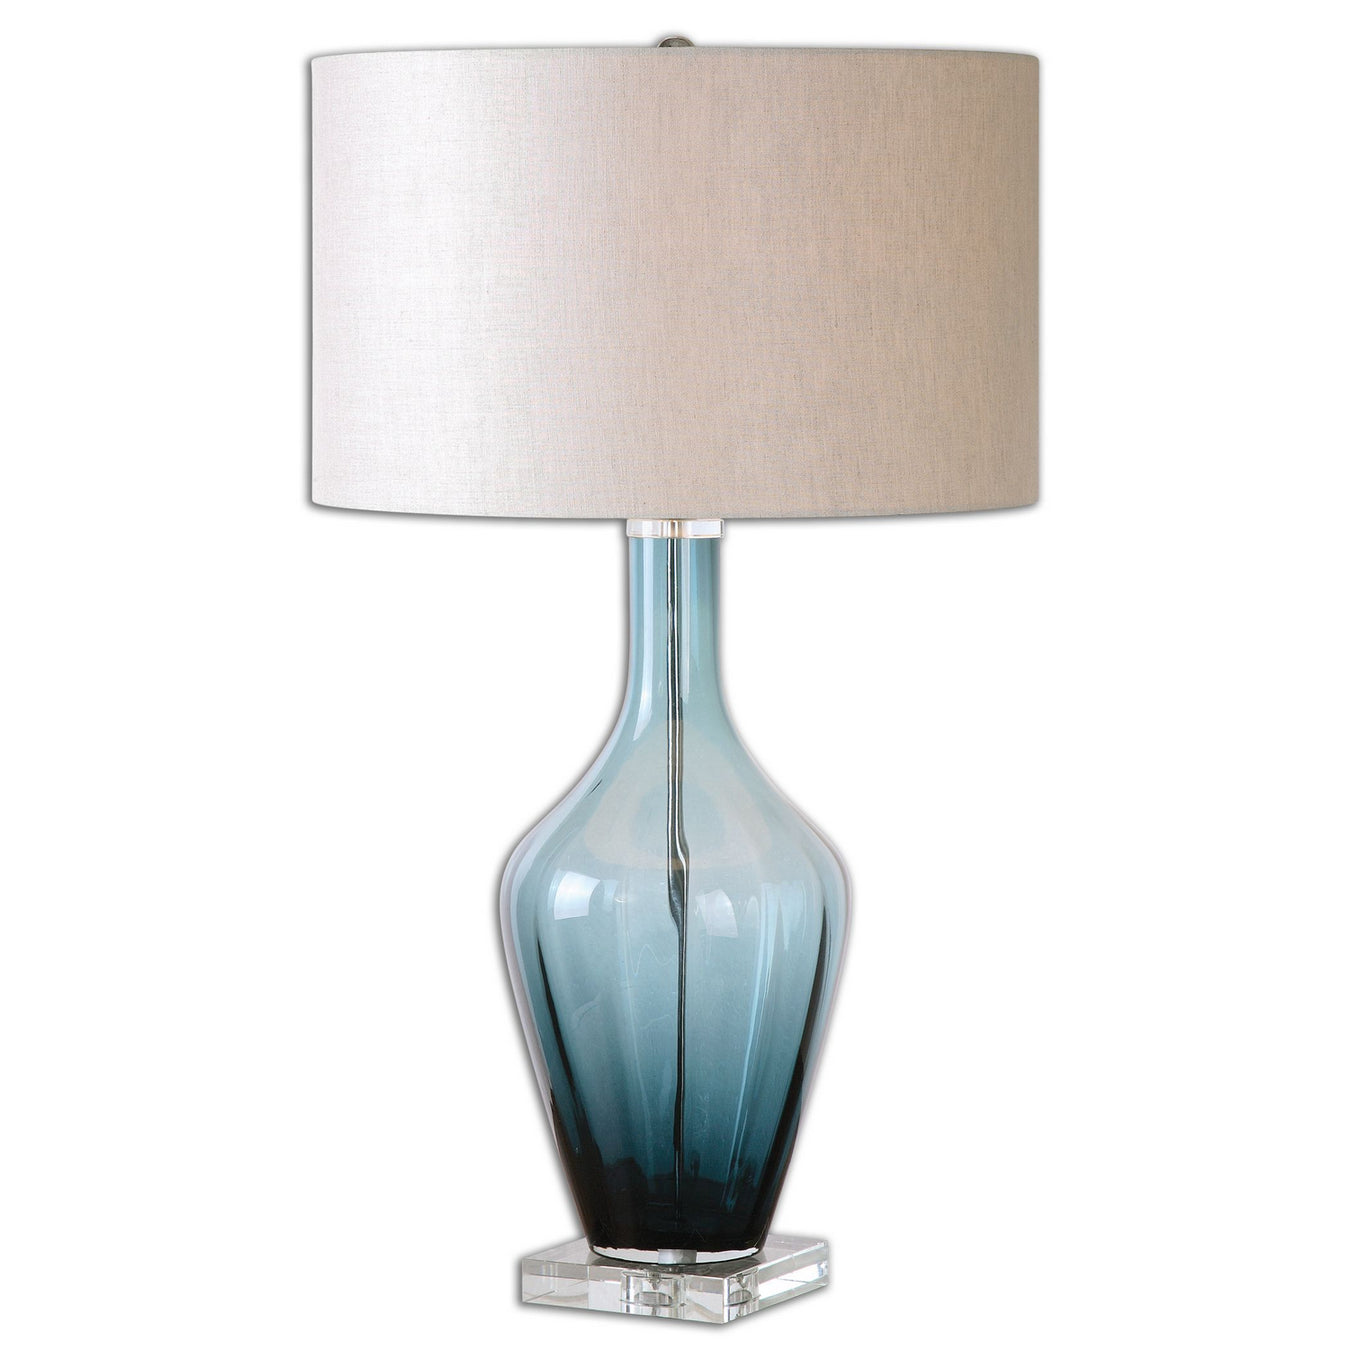 Uttermost's Hagano Blue Glass Table Lamp